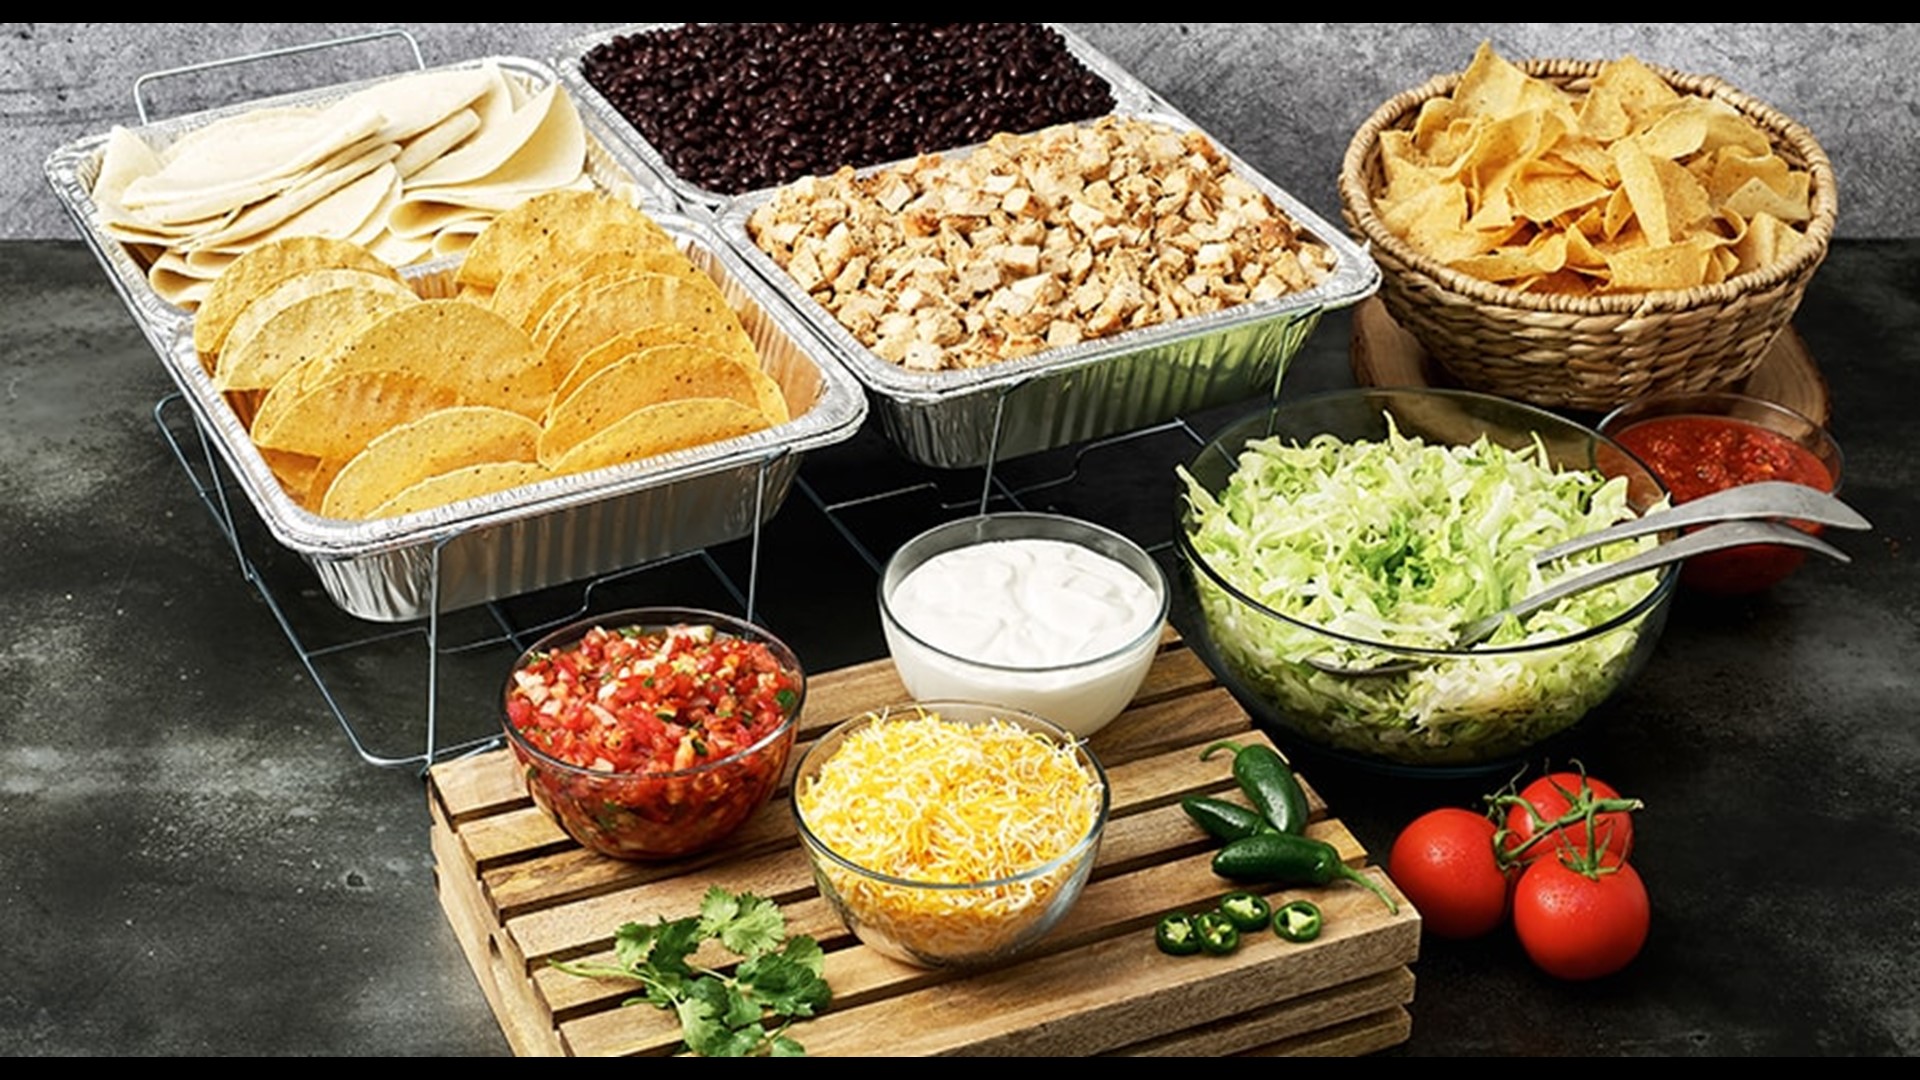 Sponsored by: Moe's Southwest Grill. Complete your holiday party with a Taco Bar from Moe's Southwest Grill. To learn more go to moes.com/catering.